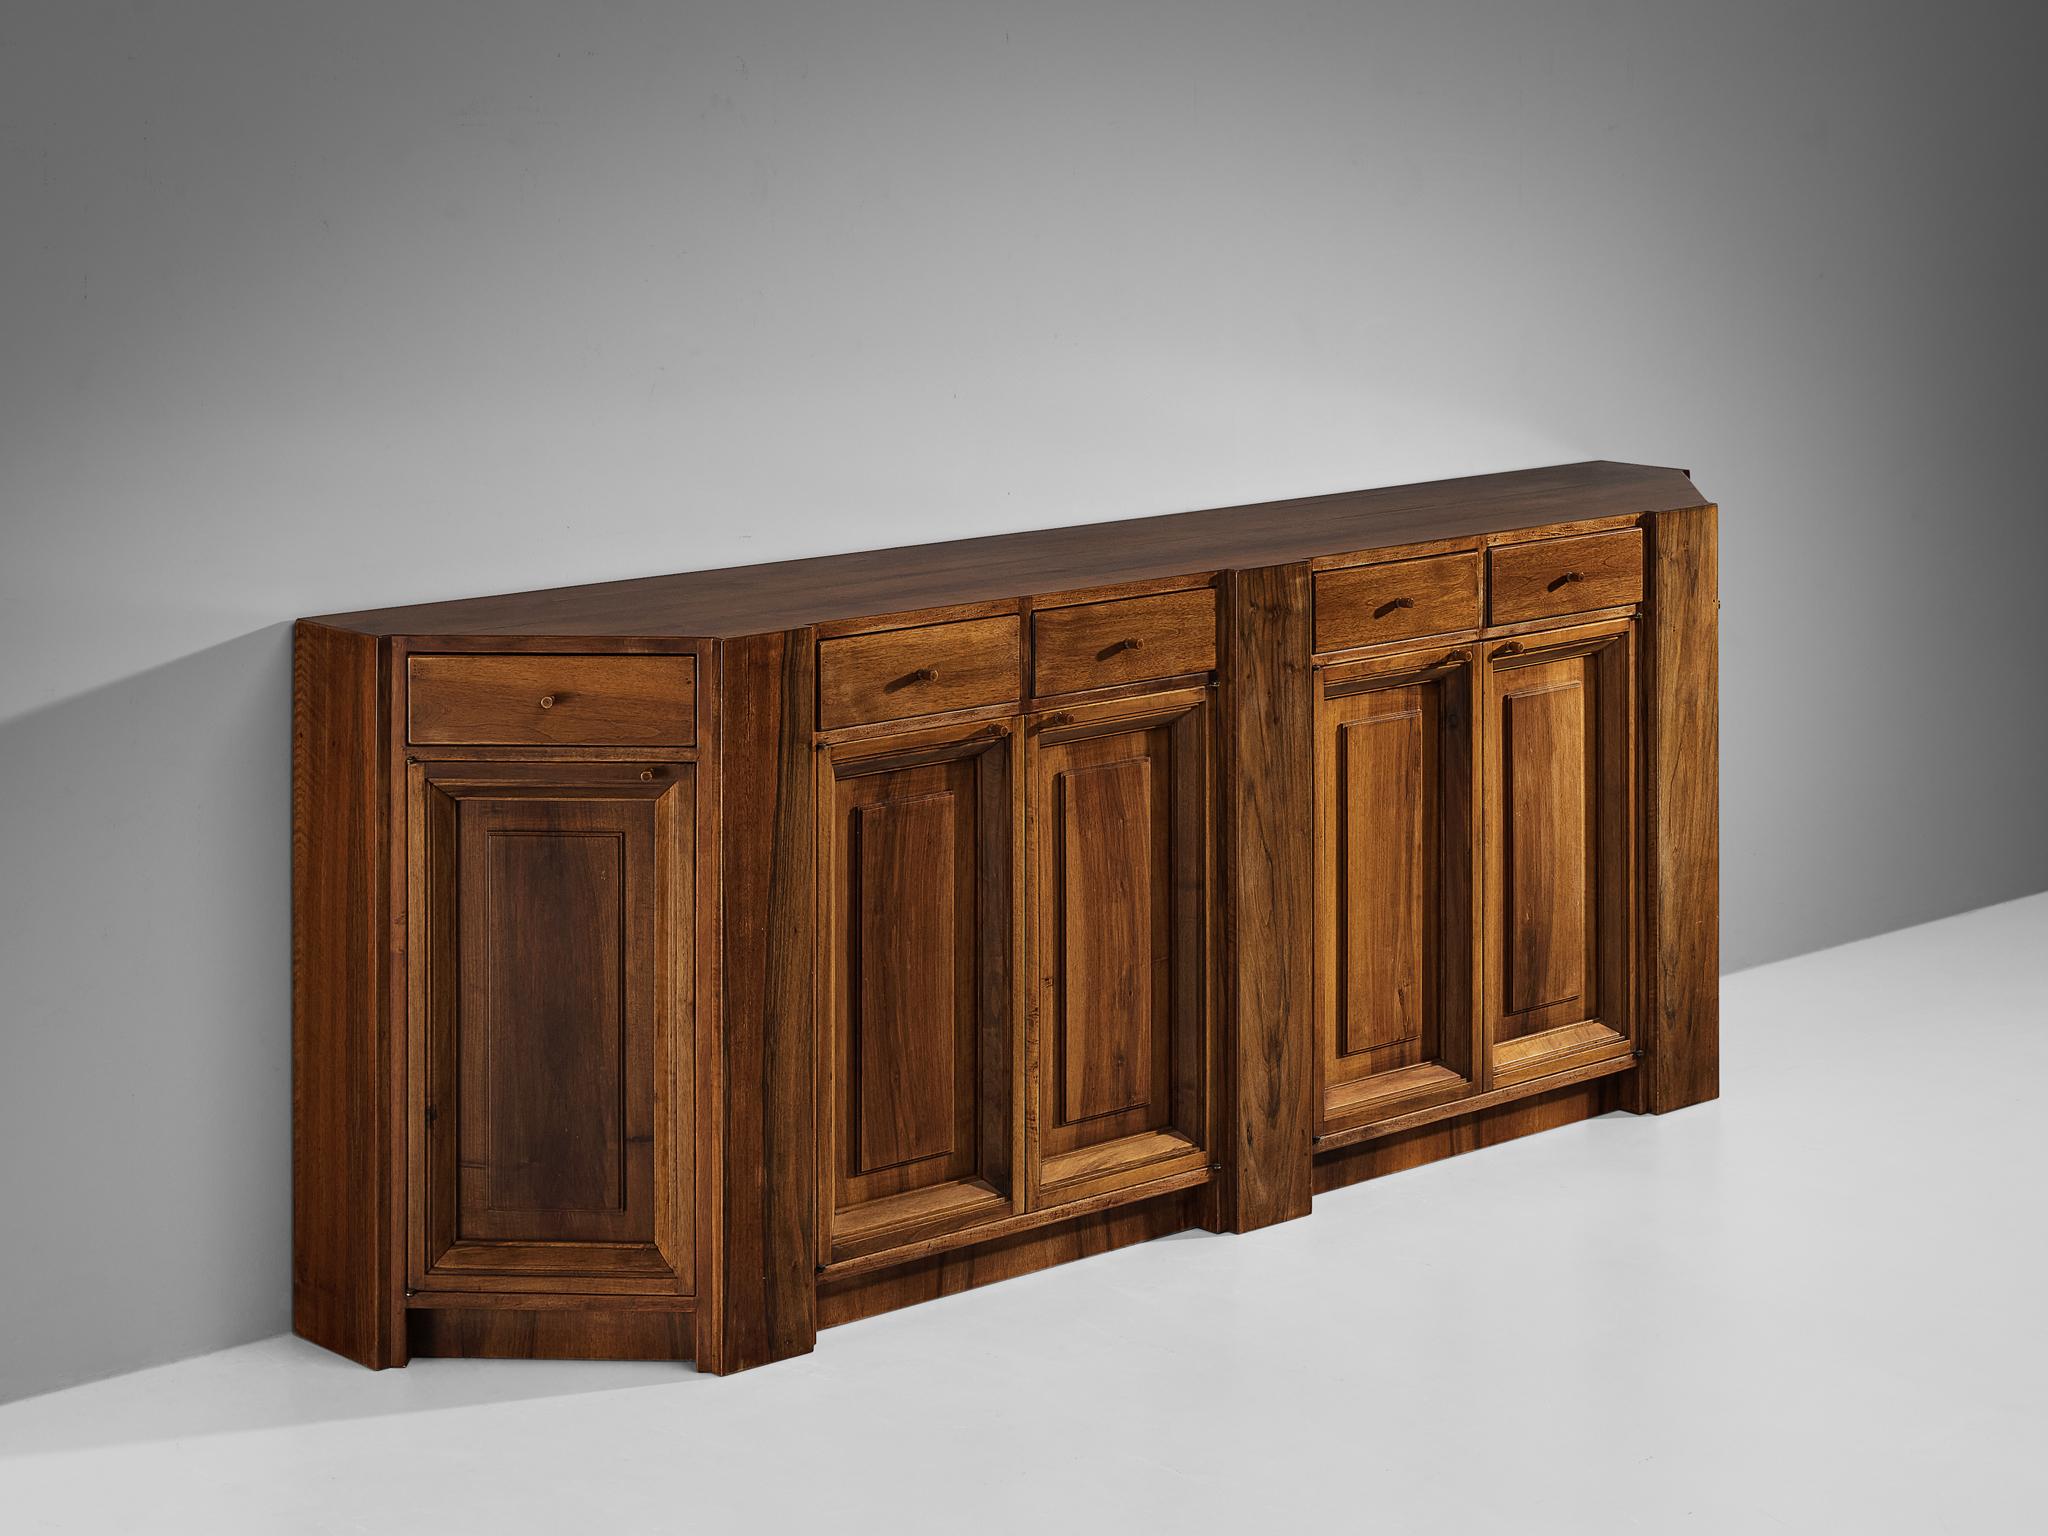 Giuseppe Rivadossi, sideboard, stained oak, Italy, 1960s

This striking sideboard by Giuseppe Rivadossi pleases the eye by all means. Rivadossi, an Italian sculptor and furniture designer, is known for his hand-carved wooden designs that combine a